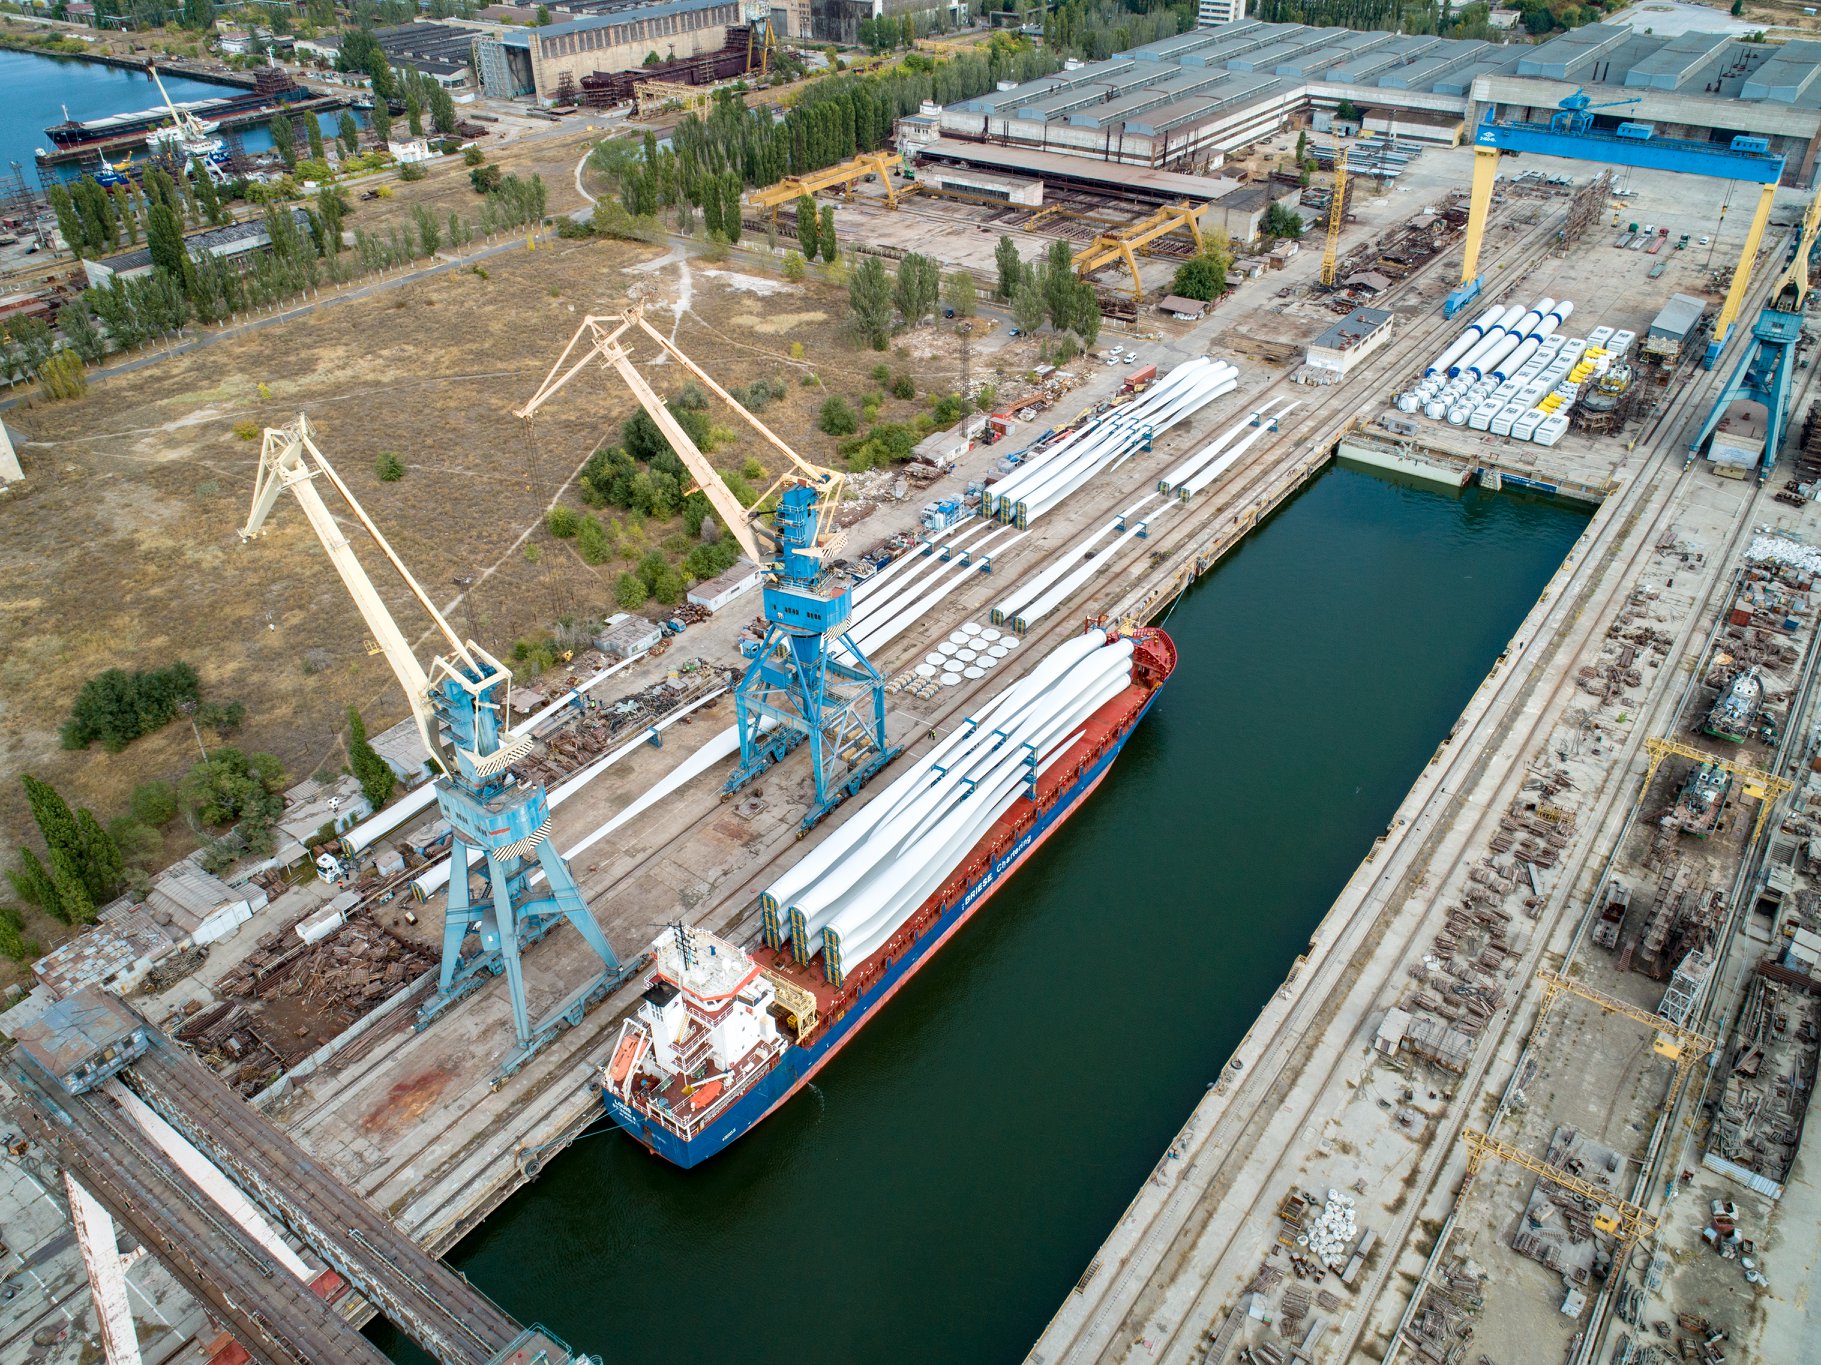 Shipyard in port mode will unload 28 ships with wind generators